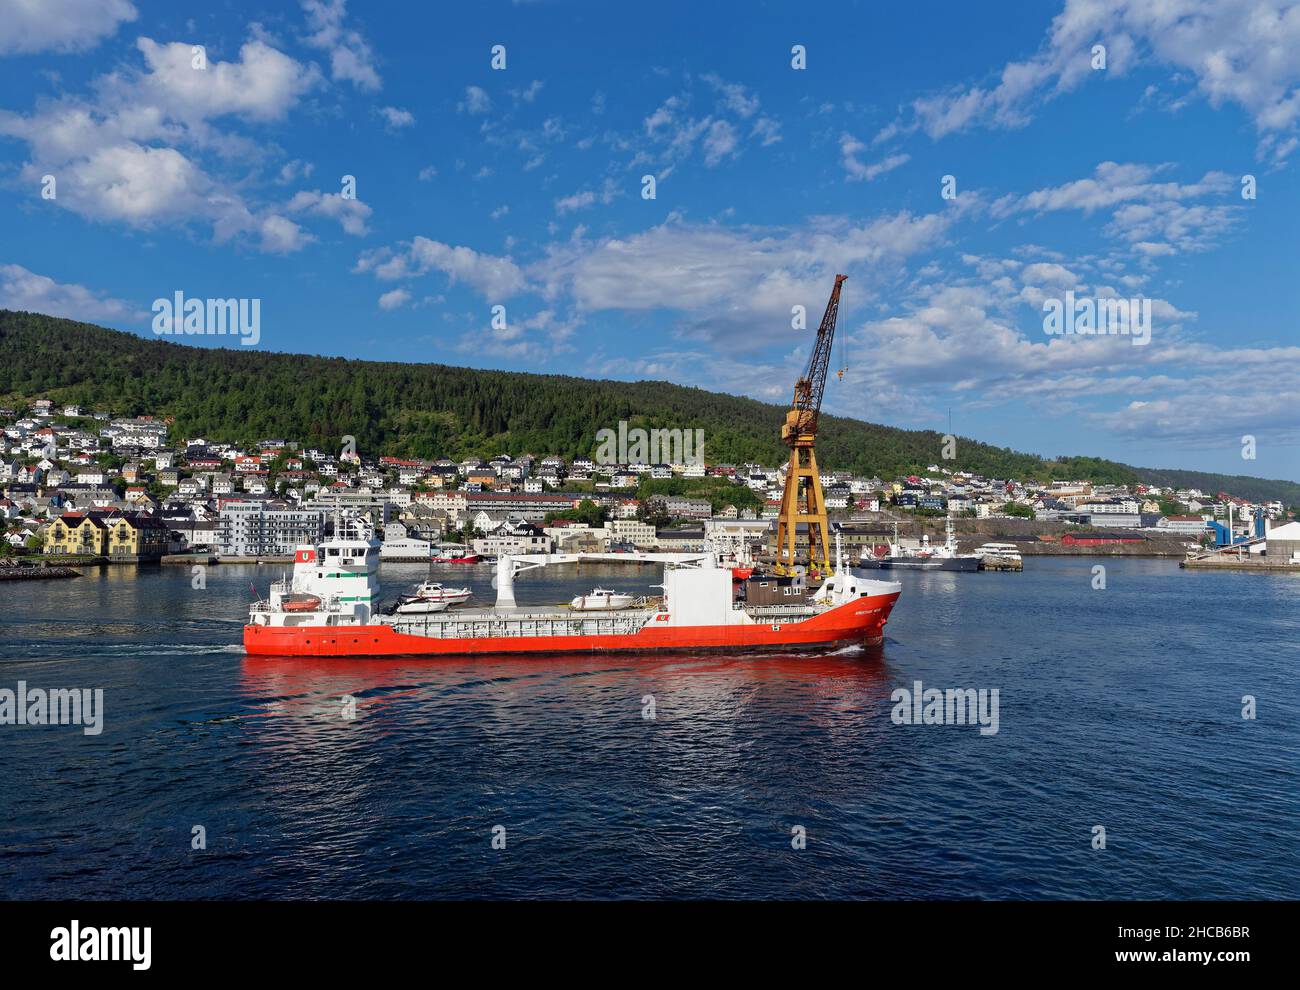 The Kristian With, a General Cargo Vessel departing from Bergen Port through the calm waters of the Fjord on a bright Summers morning. Stock Photo